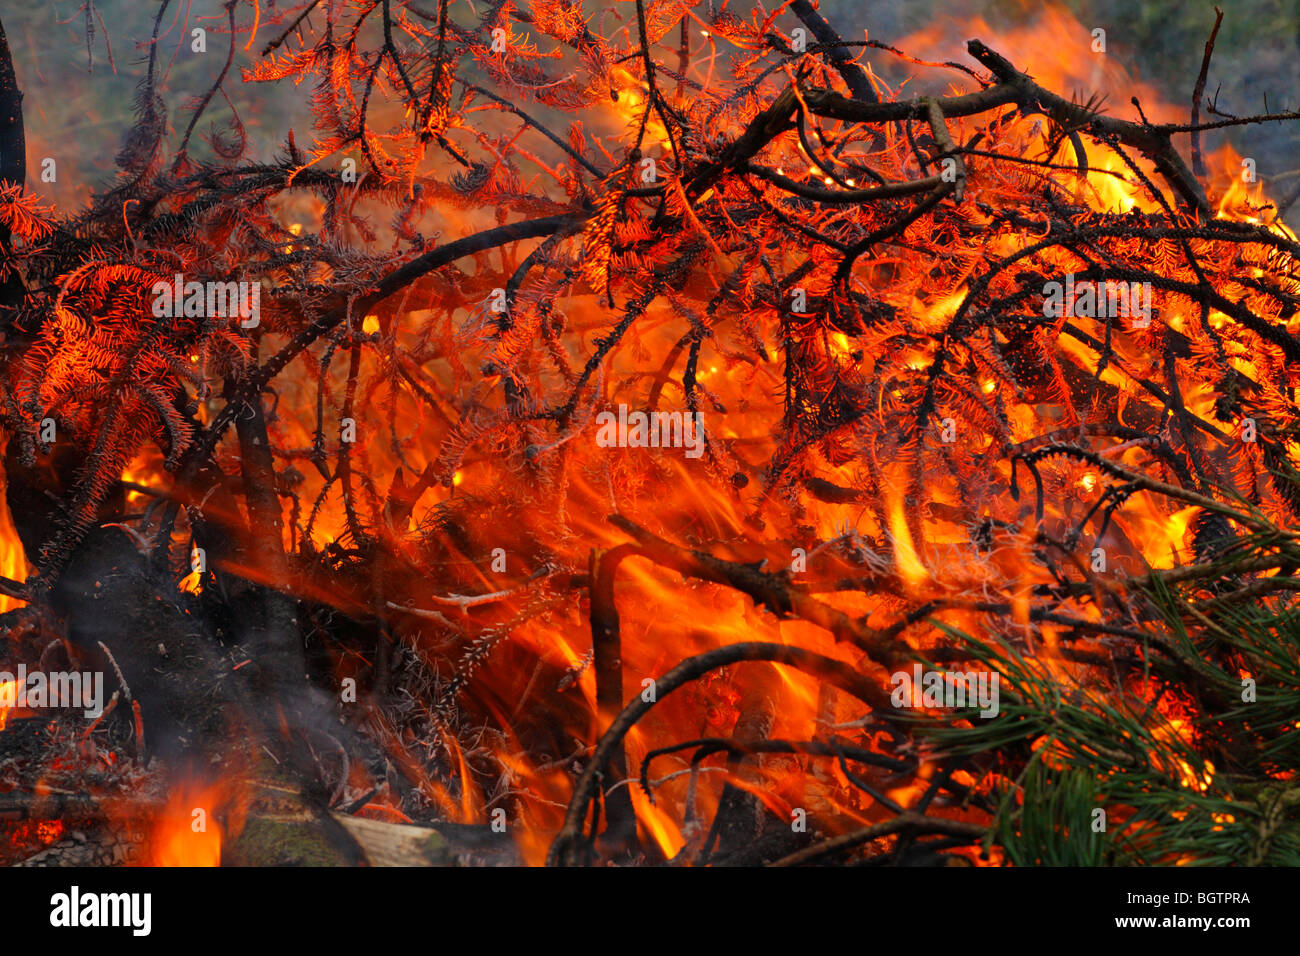 Garden bonfire with burning spruce branches, Powys, Wales. Stock Photo